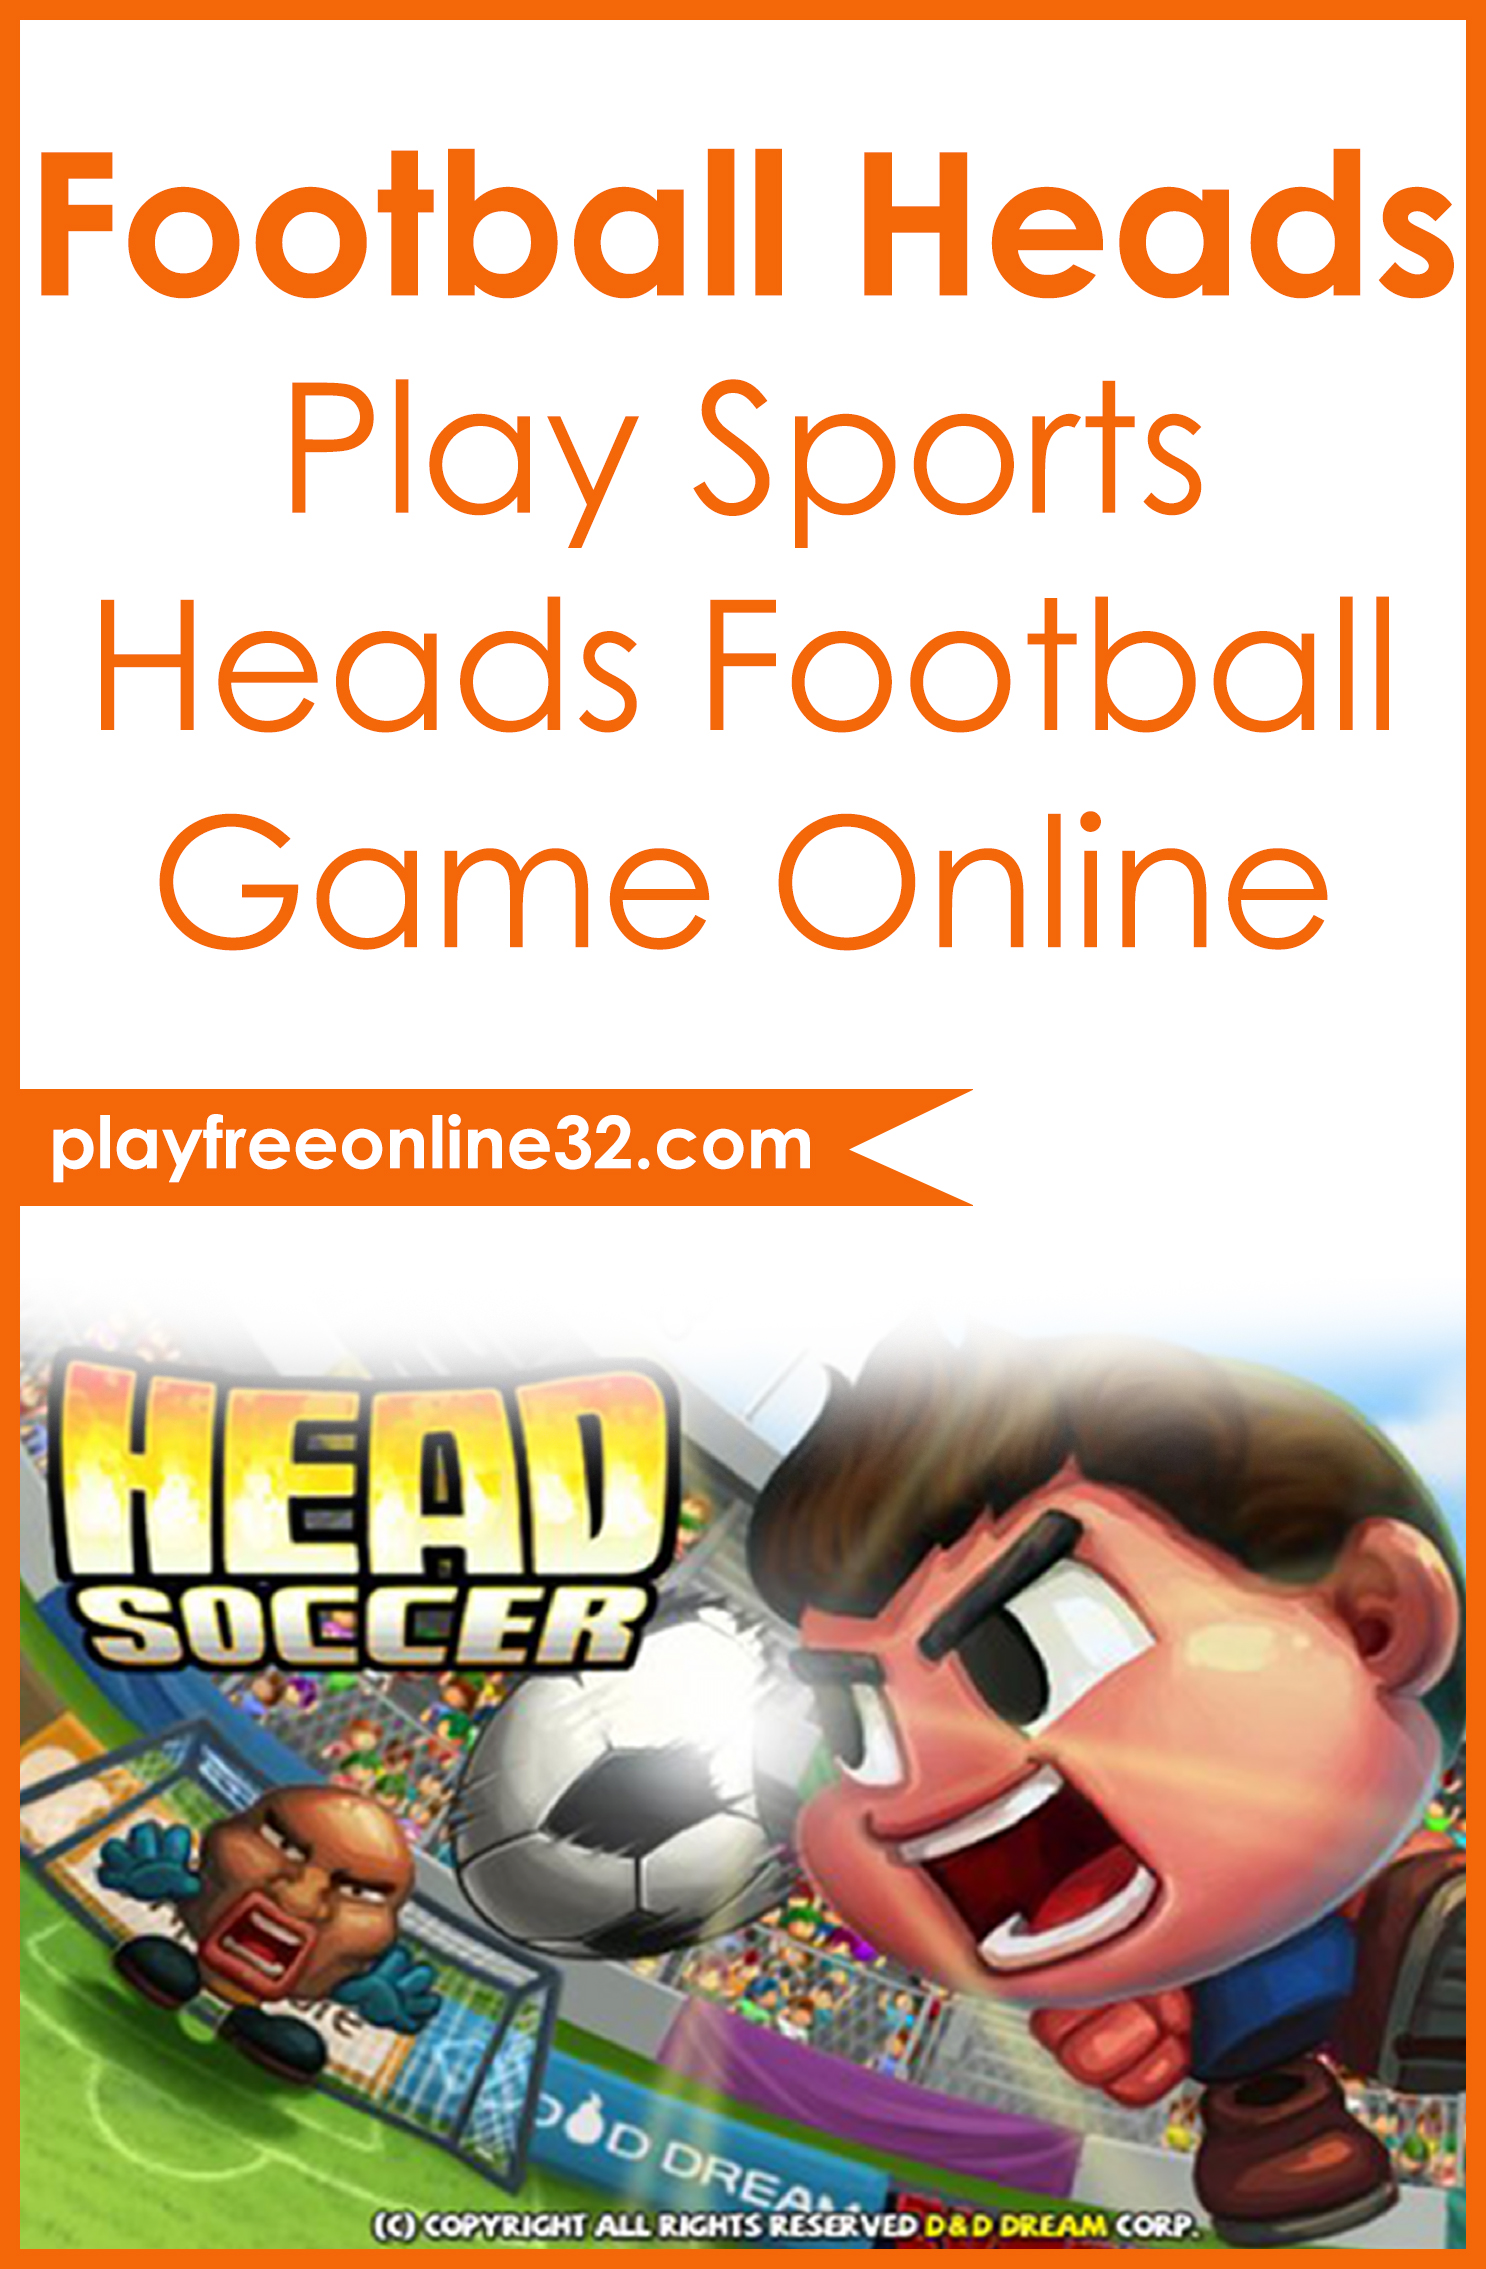 Football Heads • Play Sports Heads Football Game Online